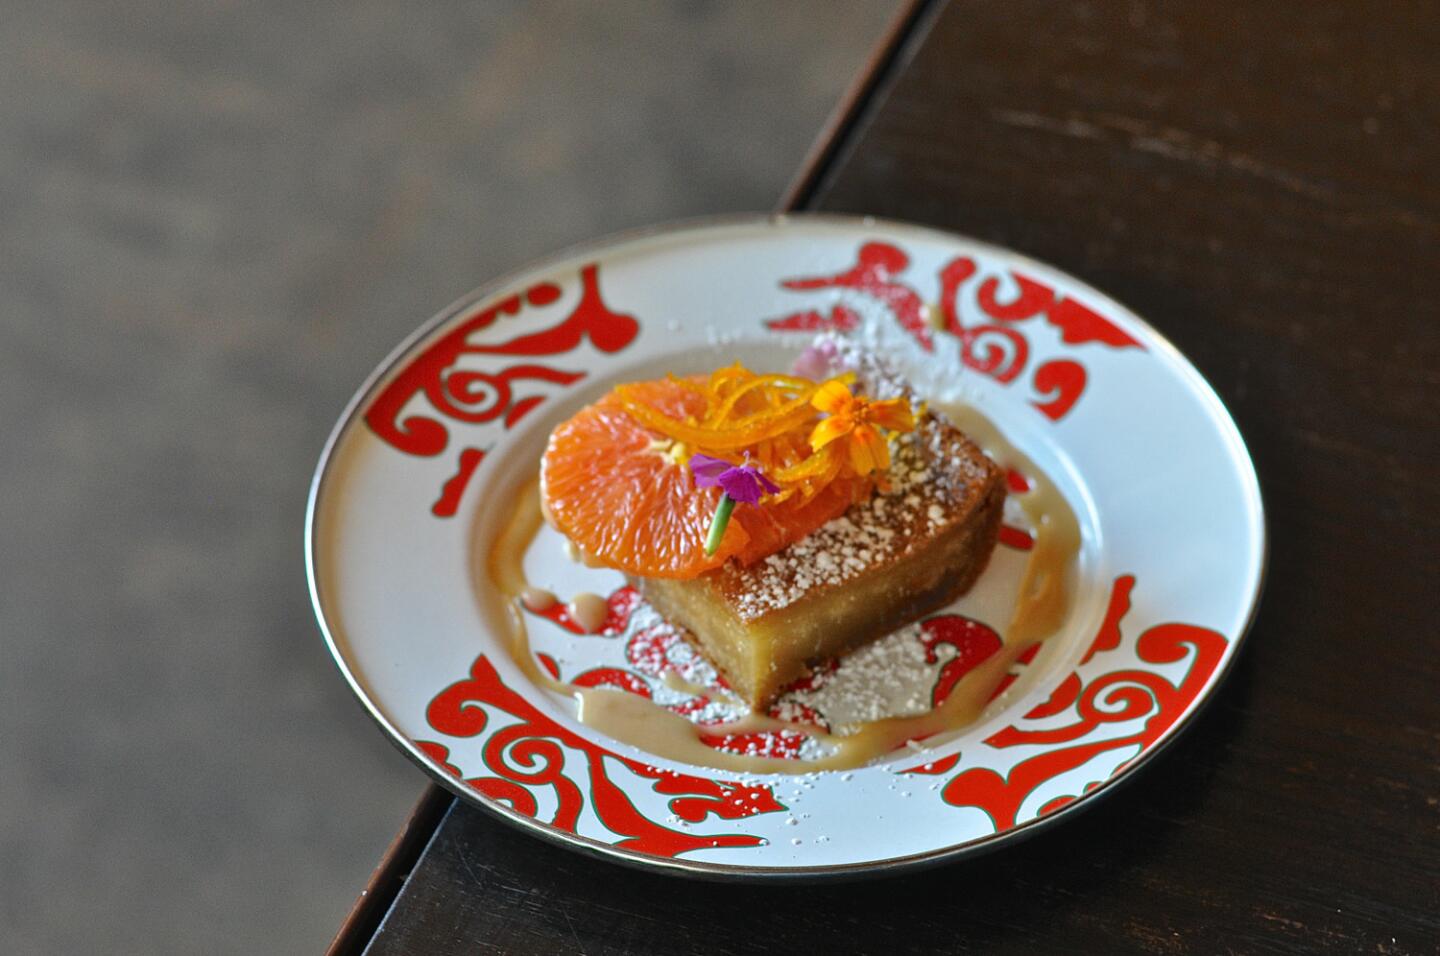 Butter mochi cake from A-Frame is shown.